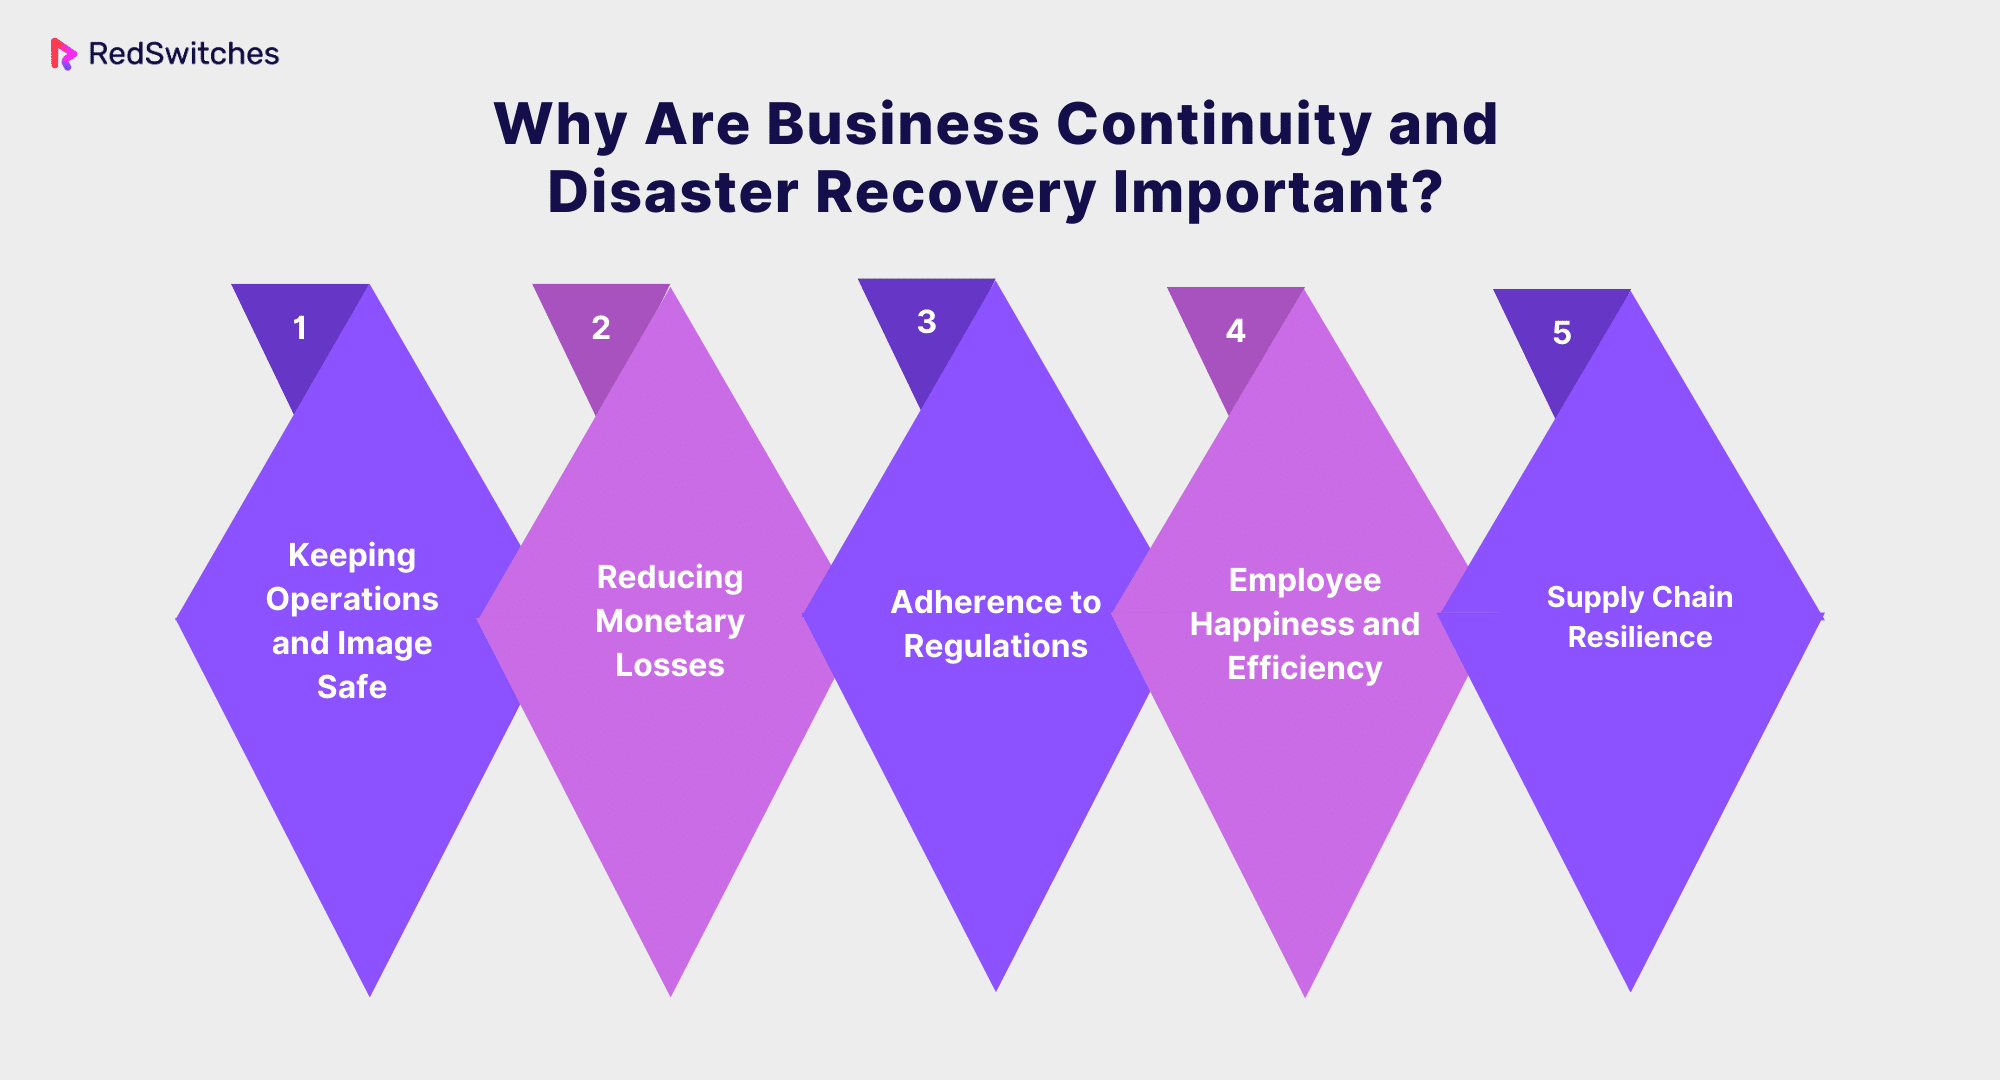 Why Are Business Continuity and Disaster Recovery Important